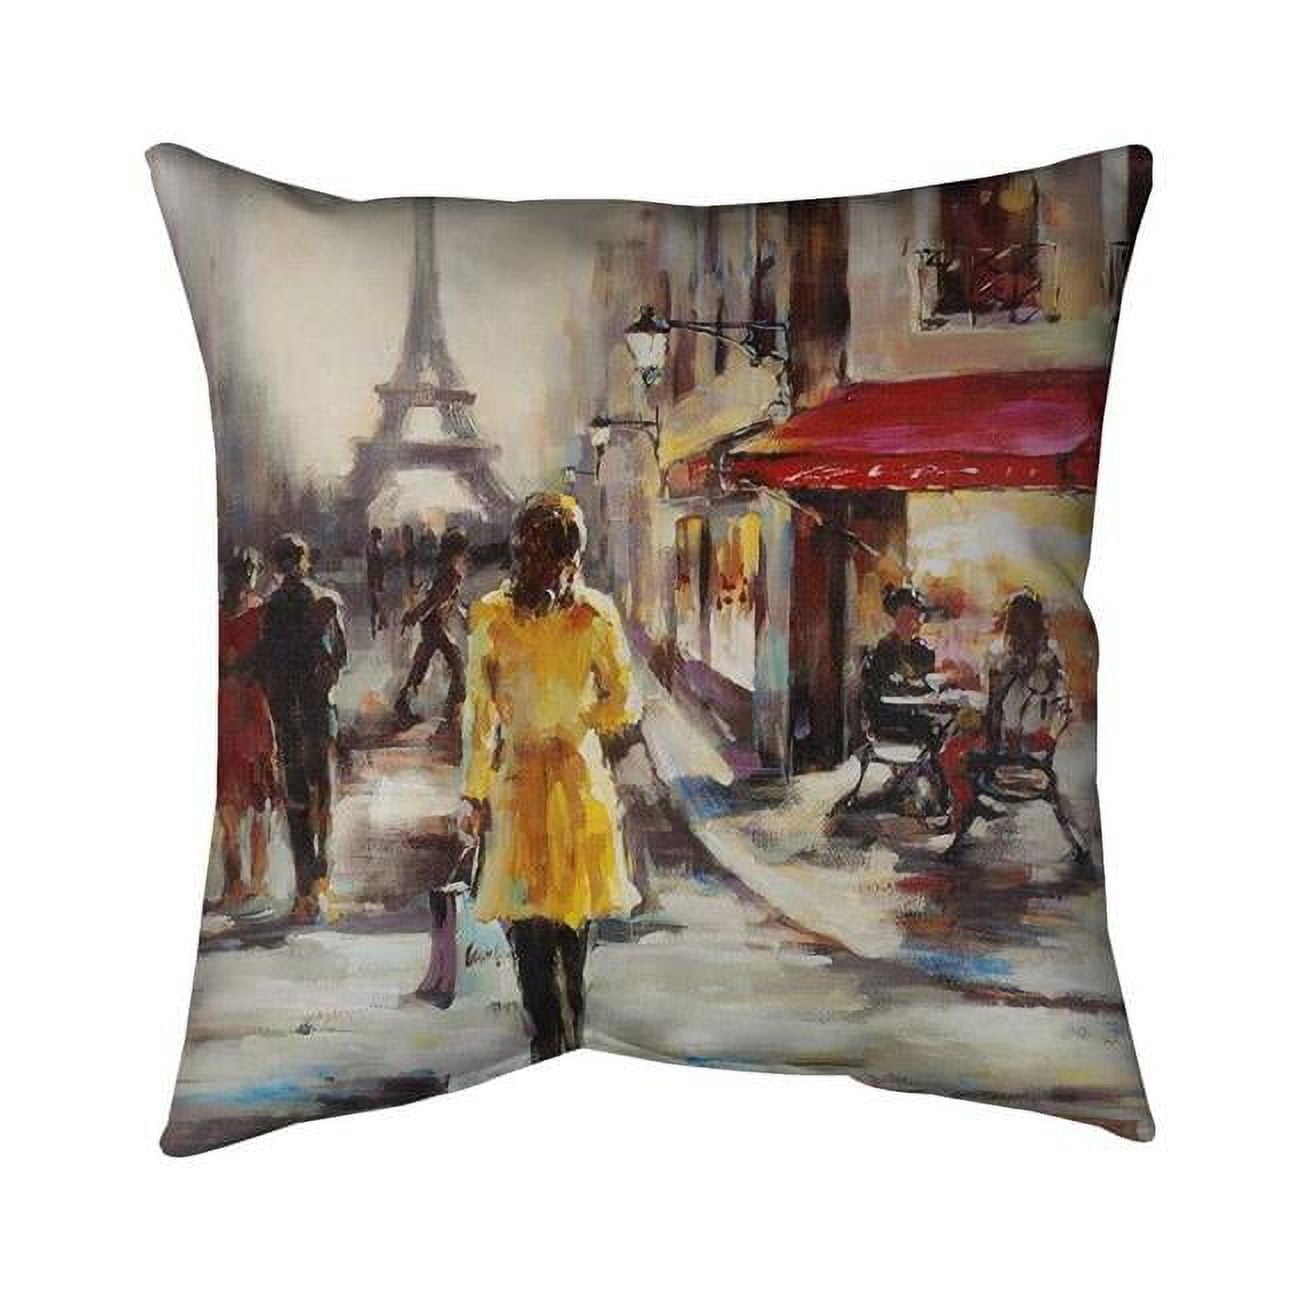 Begin Home Decor 5543-2020-ST22 20 x 20 in. Yellow Coat Woman Walking on the Street-Double Sided Print Indoor Pillow Cover